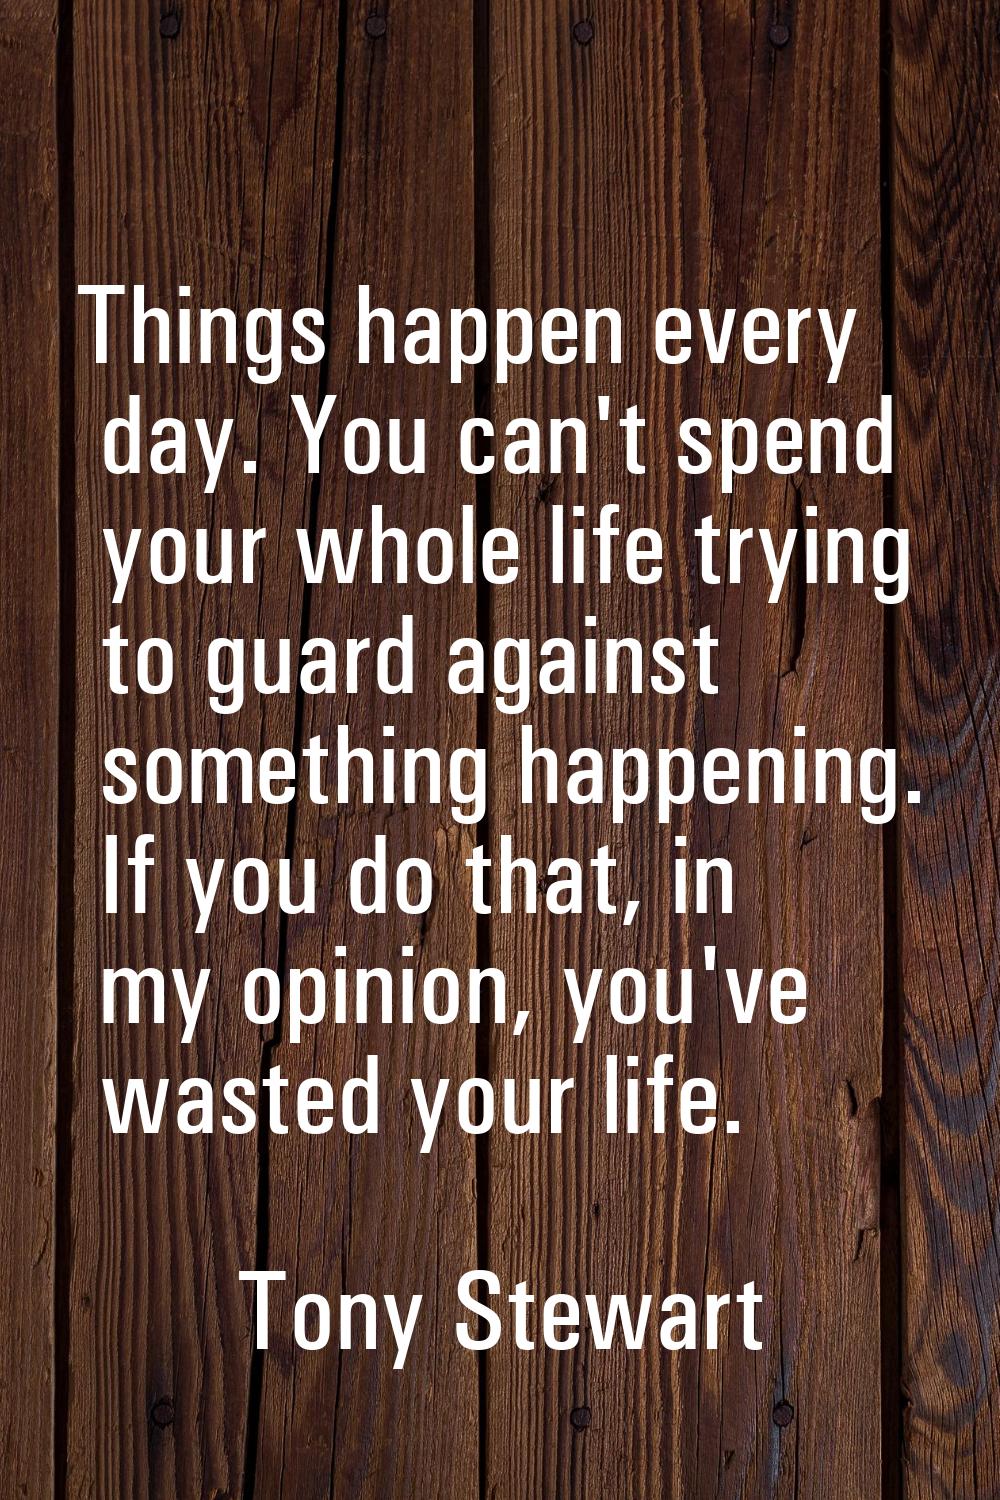 Things happen every day. You can't spend your whole life trying to guard against something happenin